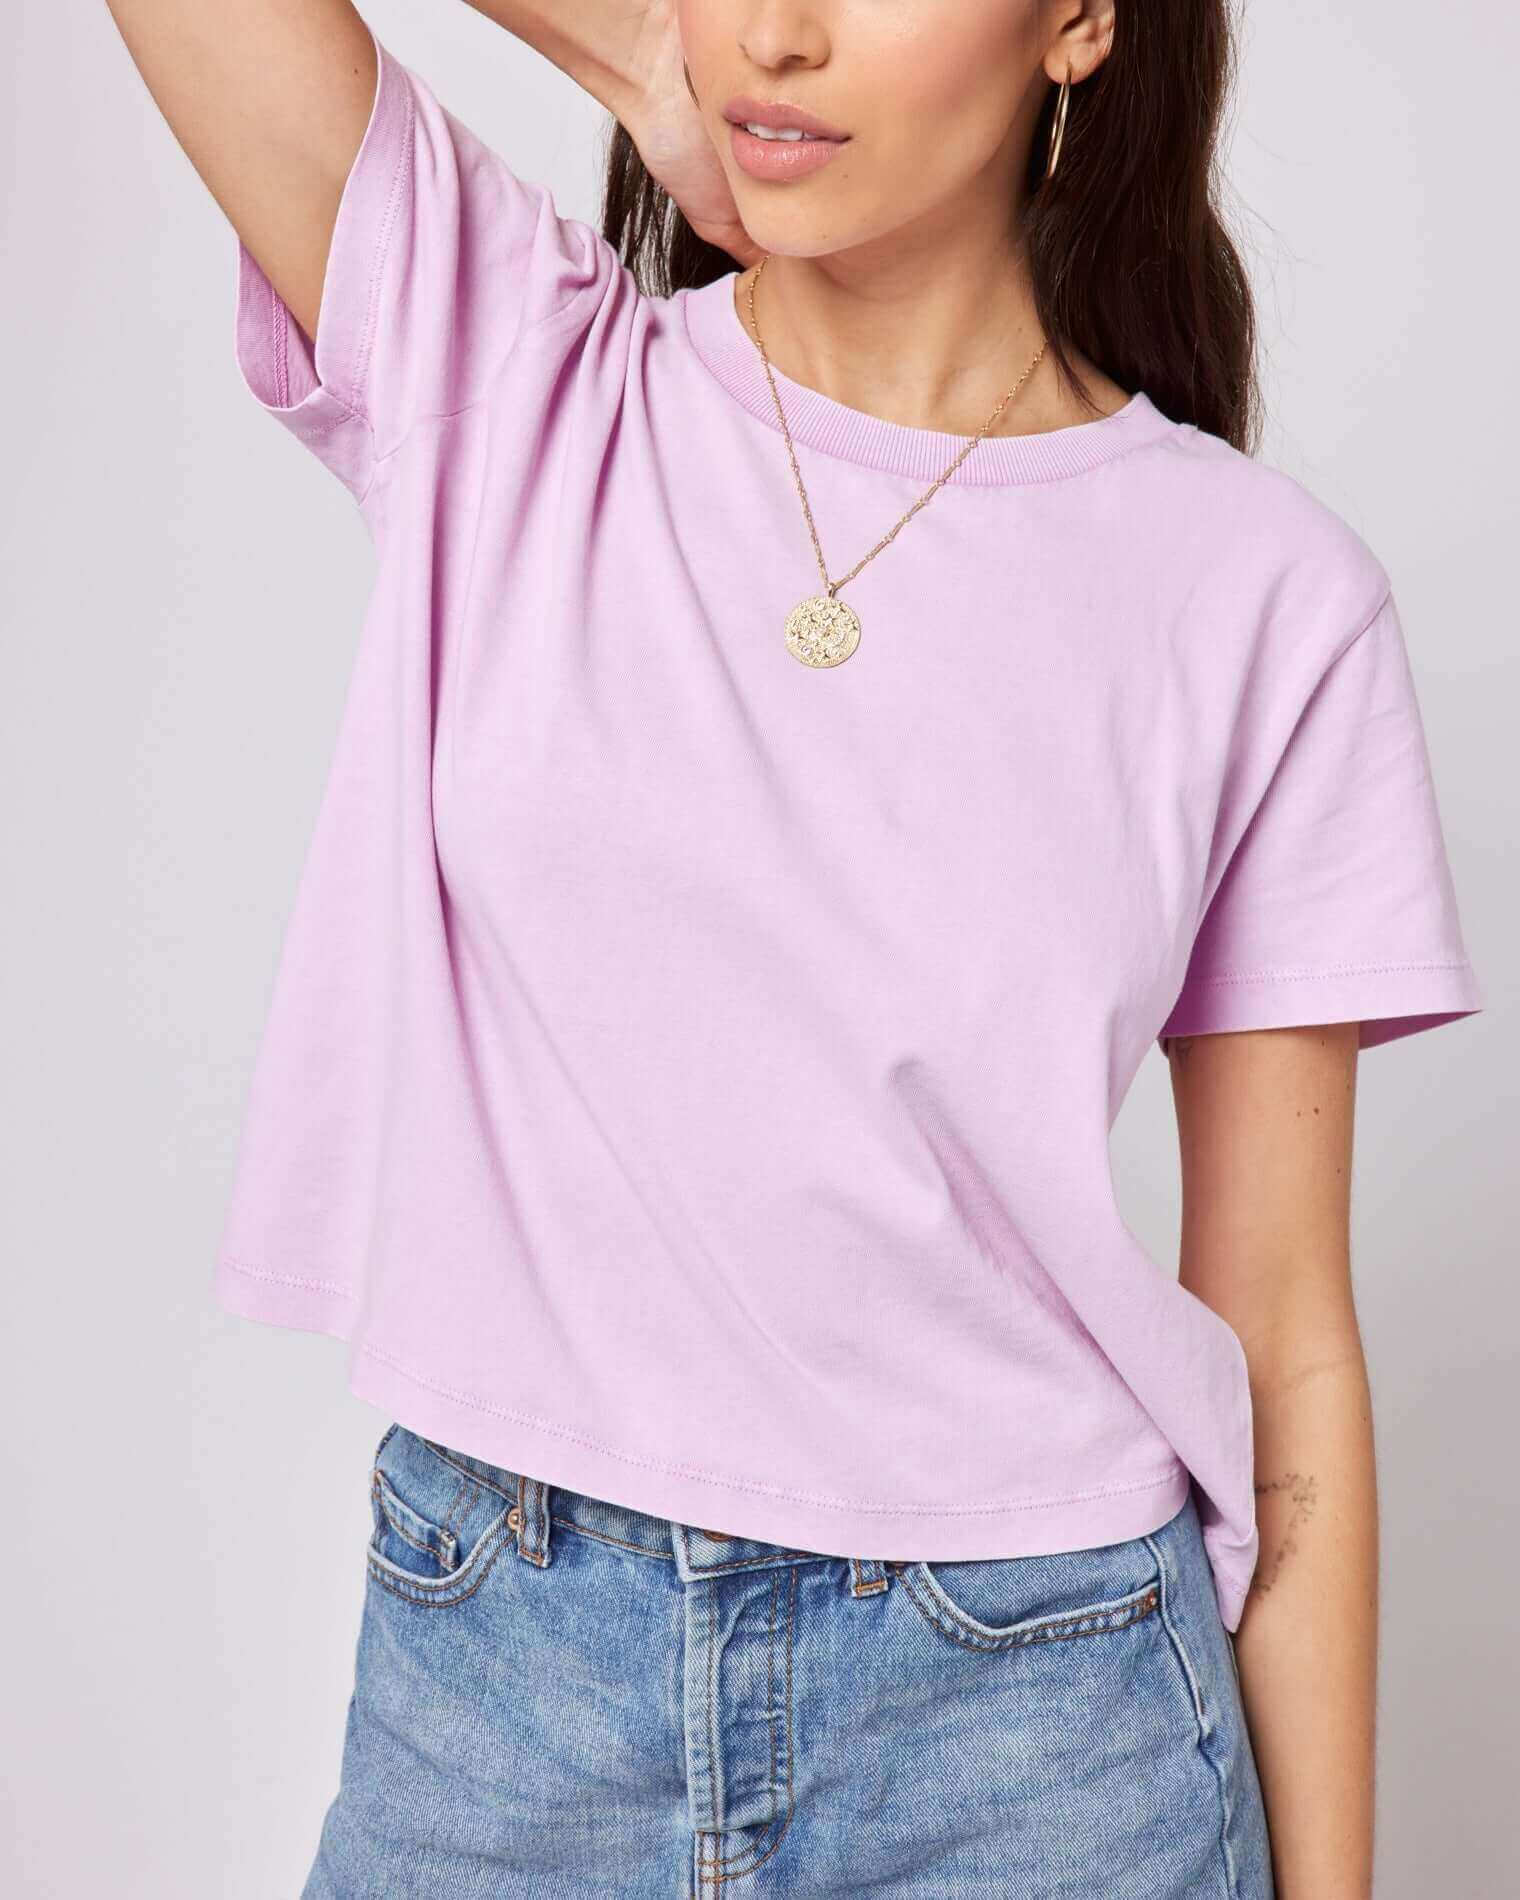 LSpace All Day Top in Lily - Close